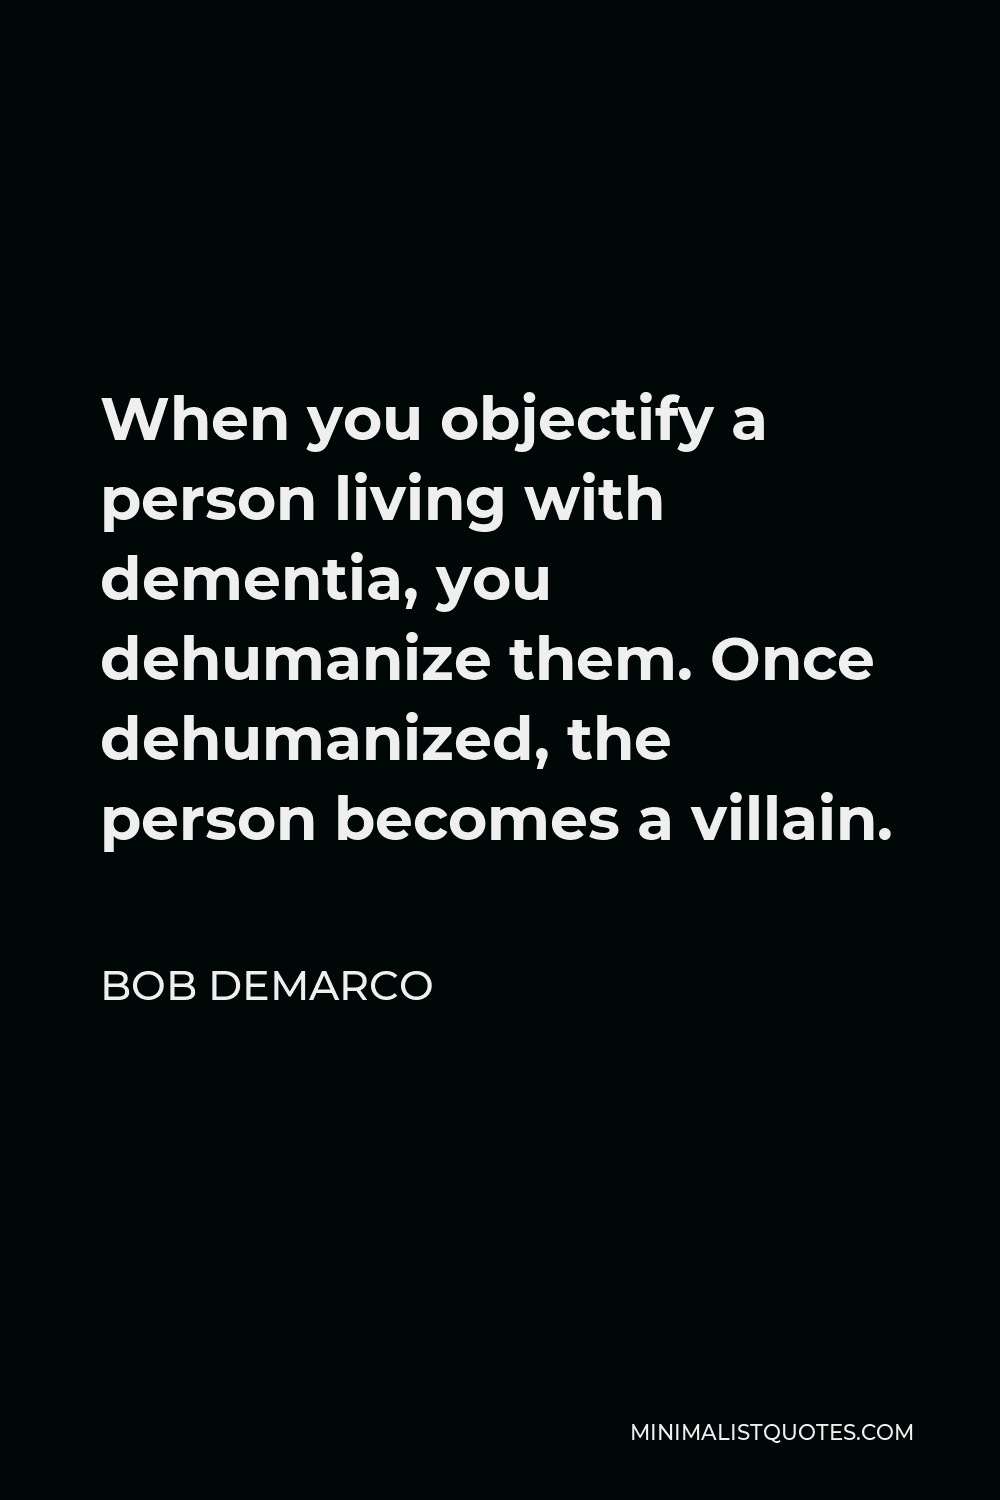 Bob DeMarco Quote - When you objectify a person living with dementia, you dehumanize them. Once dehumanized, the person becomes a villain.